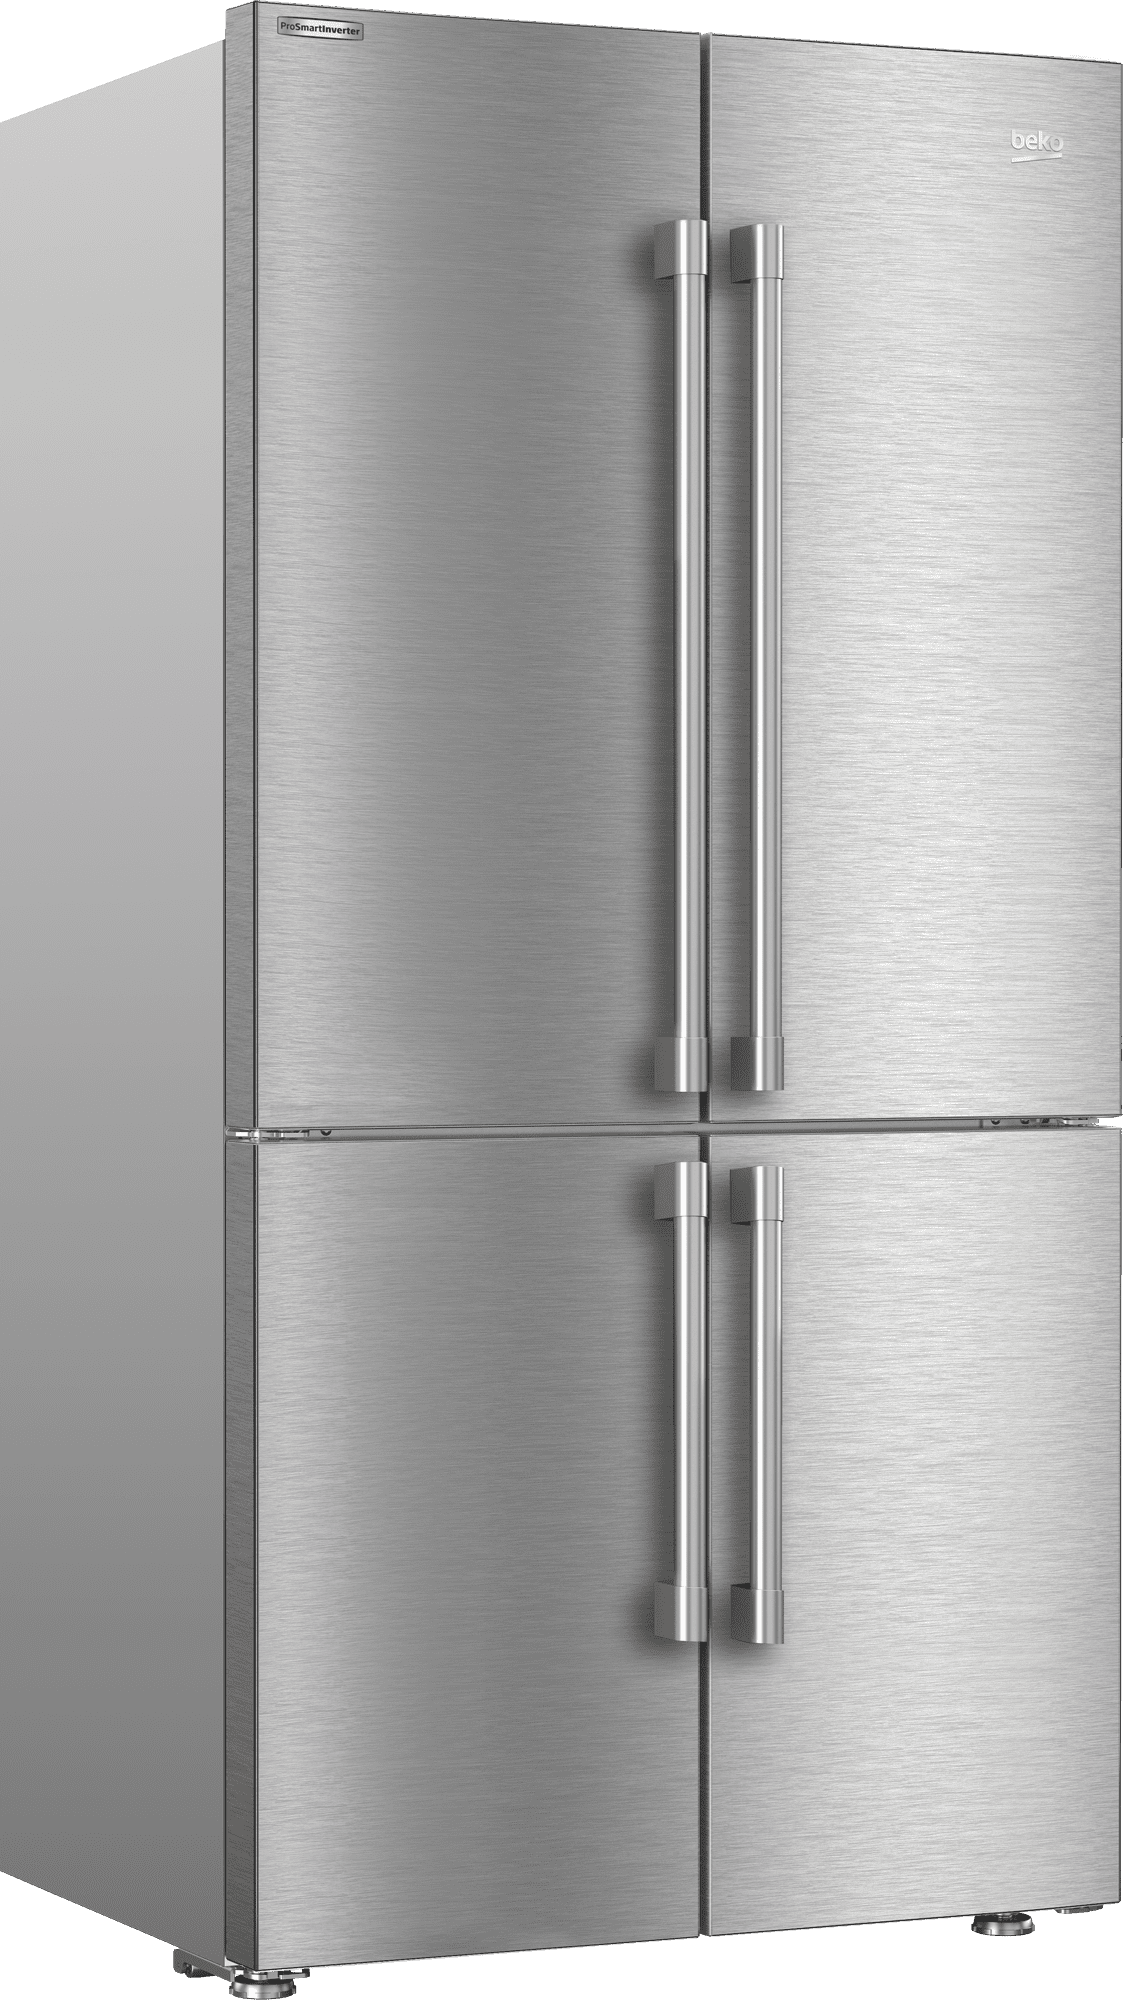 Beko BFFD3626SS 36" French Four-Door Stainless Steel Refrigerator With Auto Ice Maker, Water Dispenser